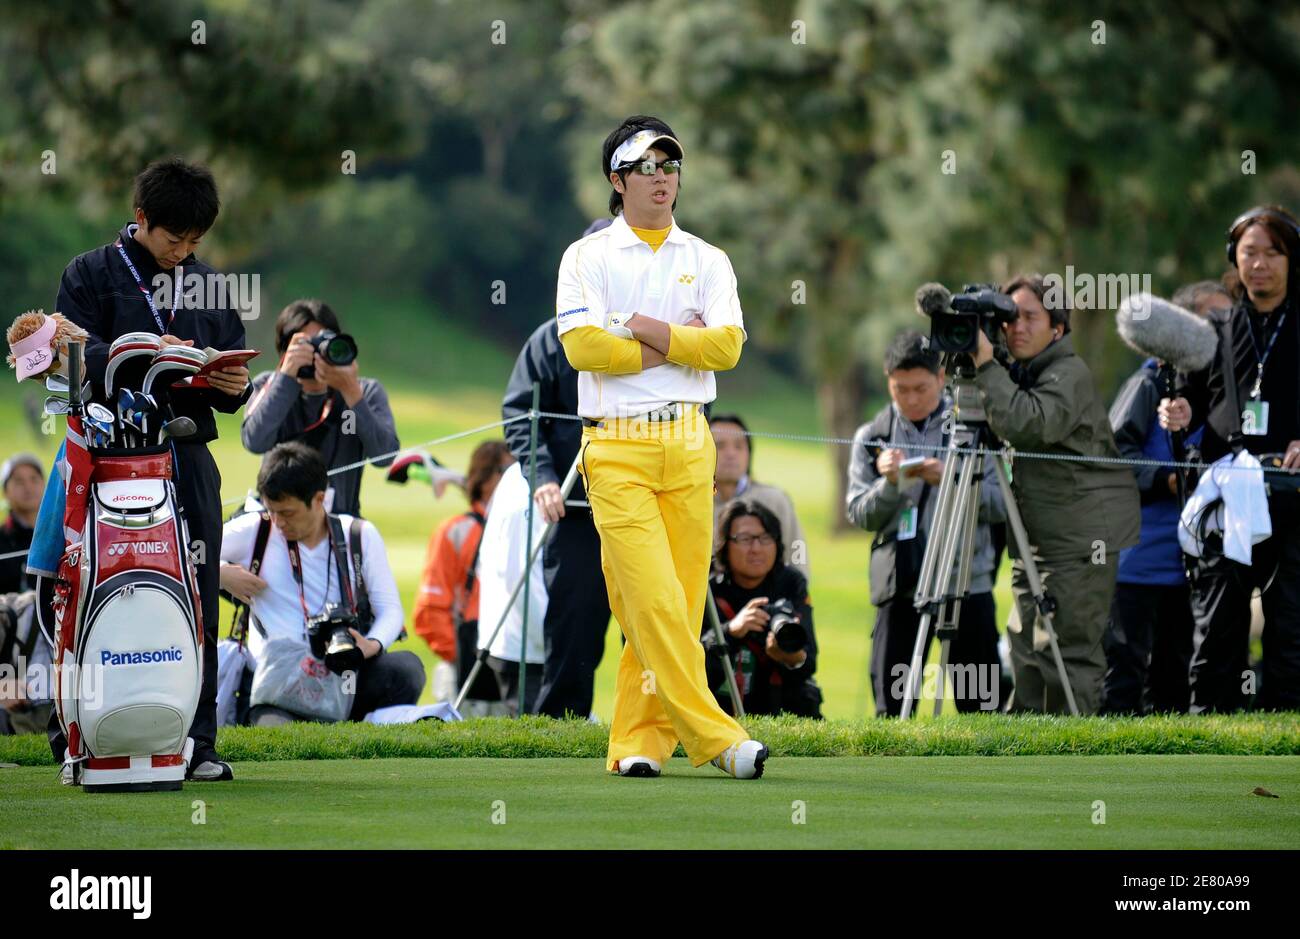 Golfer Ryo Ishikawa, 17, of Japan and his caddie Hiroyuki Kato (L) wait their turn on the ninth hole during a practice round in preparation for the Northern Trust Open golf tournament in the Pacific Palisades area of Los Angeles February 17, 2009. REUTERS/Gus Ruelas (UNITED STATES) Stock Photo